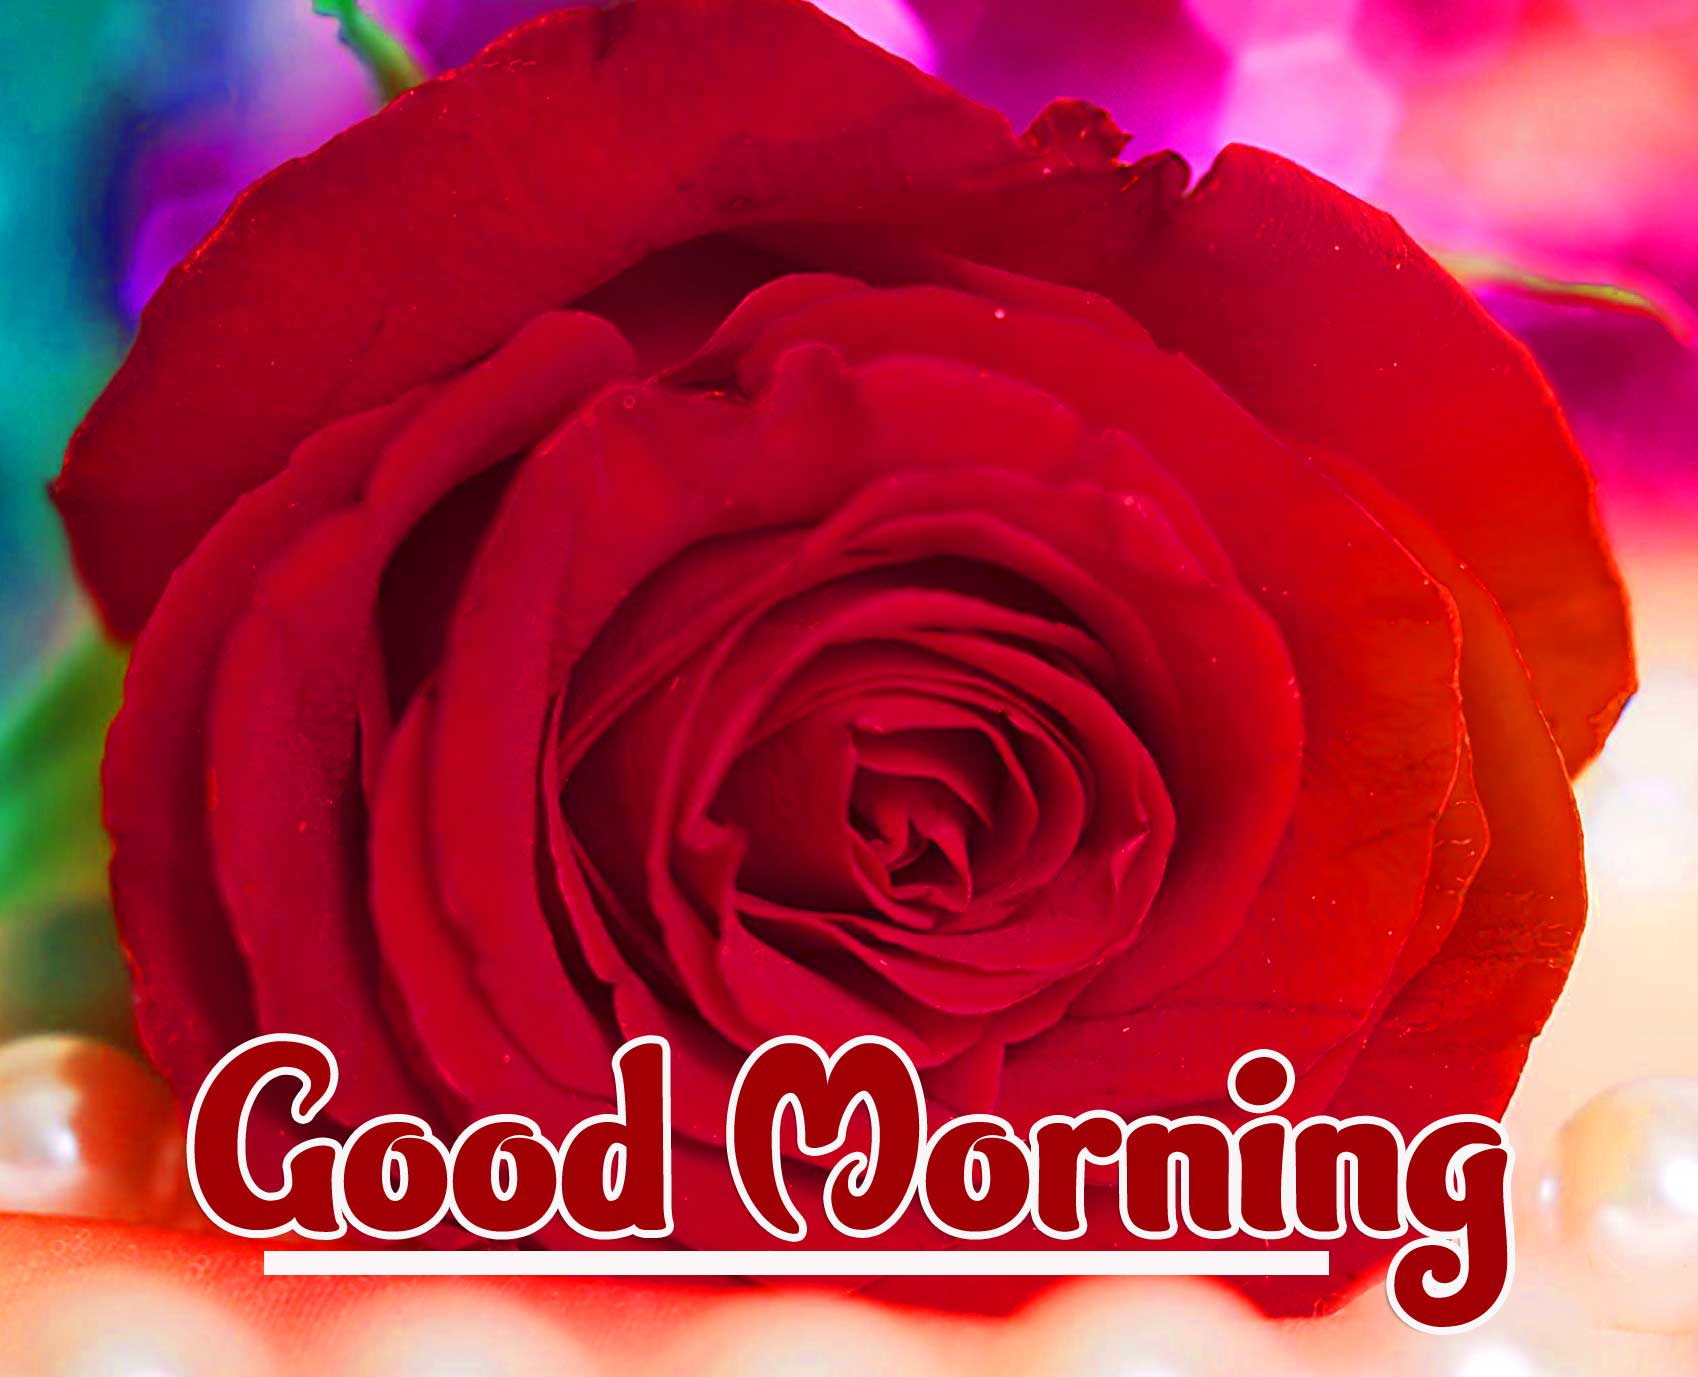 Red Rose Good Morning Wallpaper pics Pictures Download 